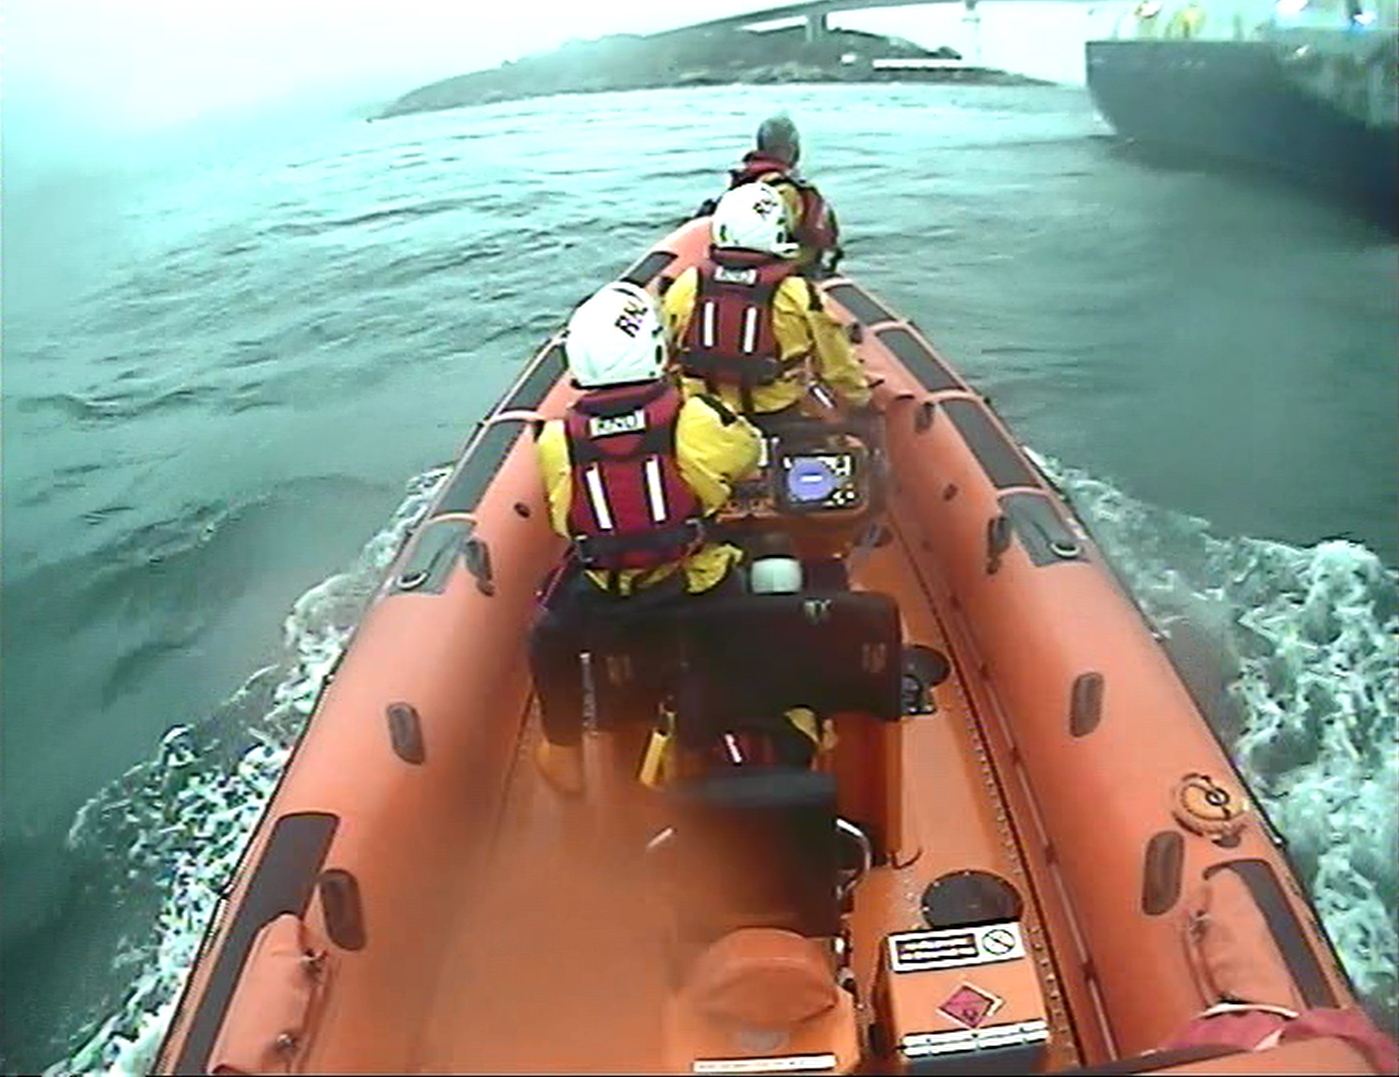 Kyle lifeboat responds to a cargo ship aground under the Skye Bridge.